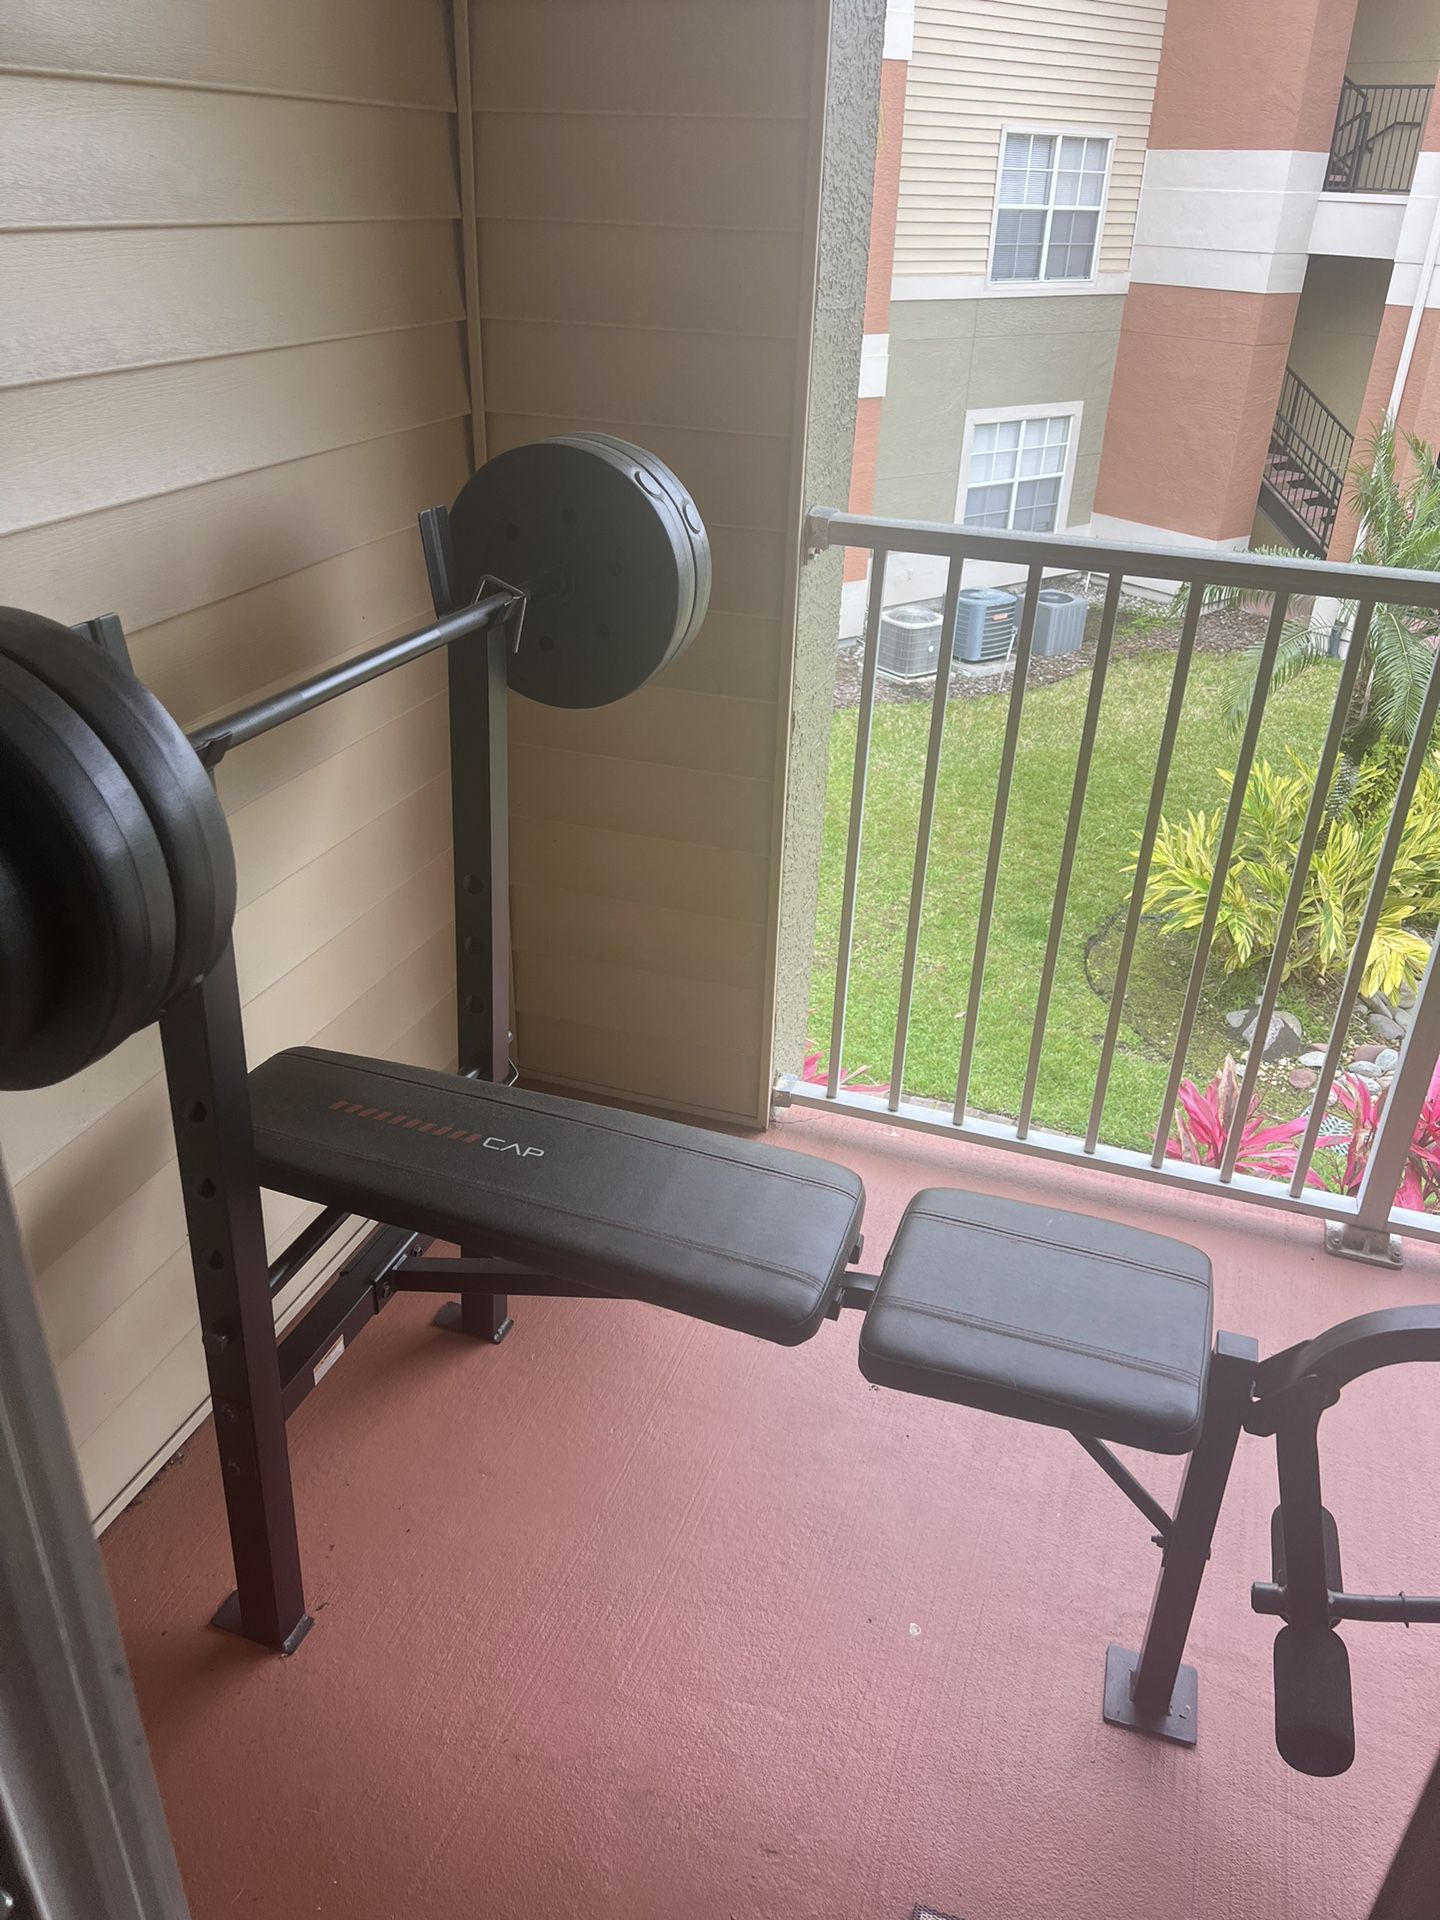 Work Out Bench And Weights